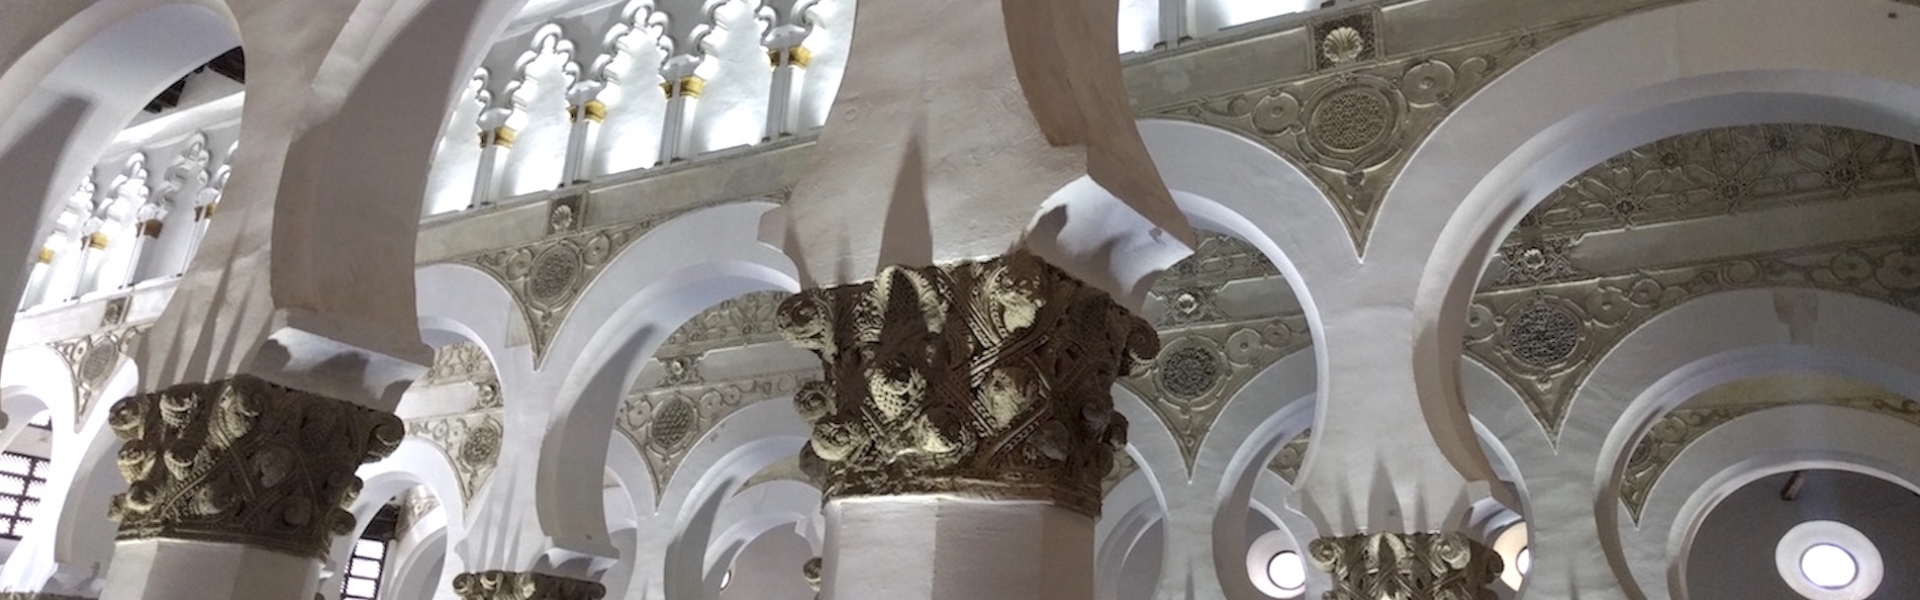 Historical architecture of white and gold inside church